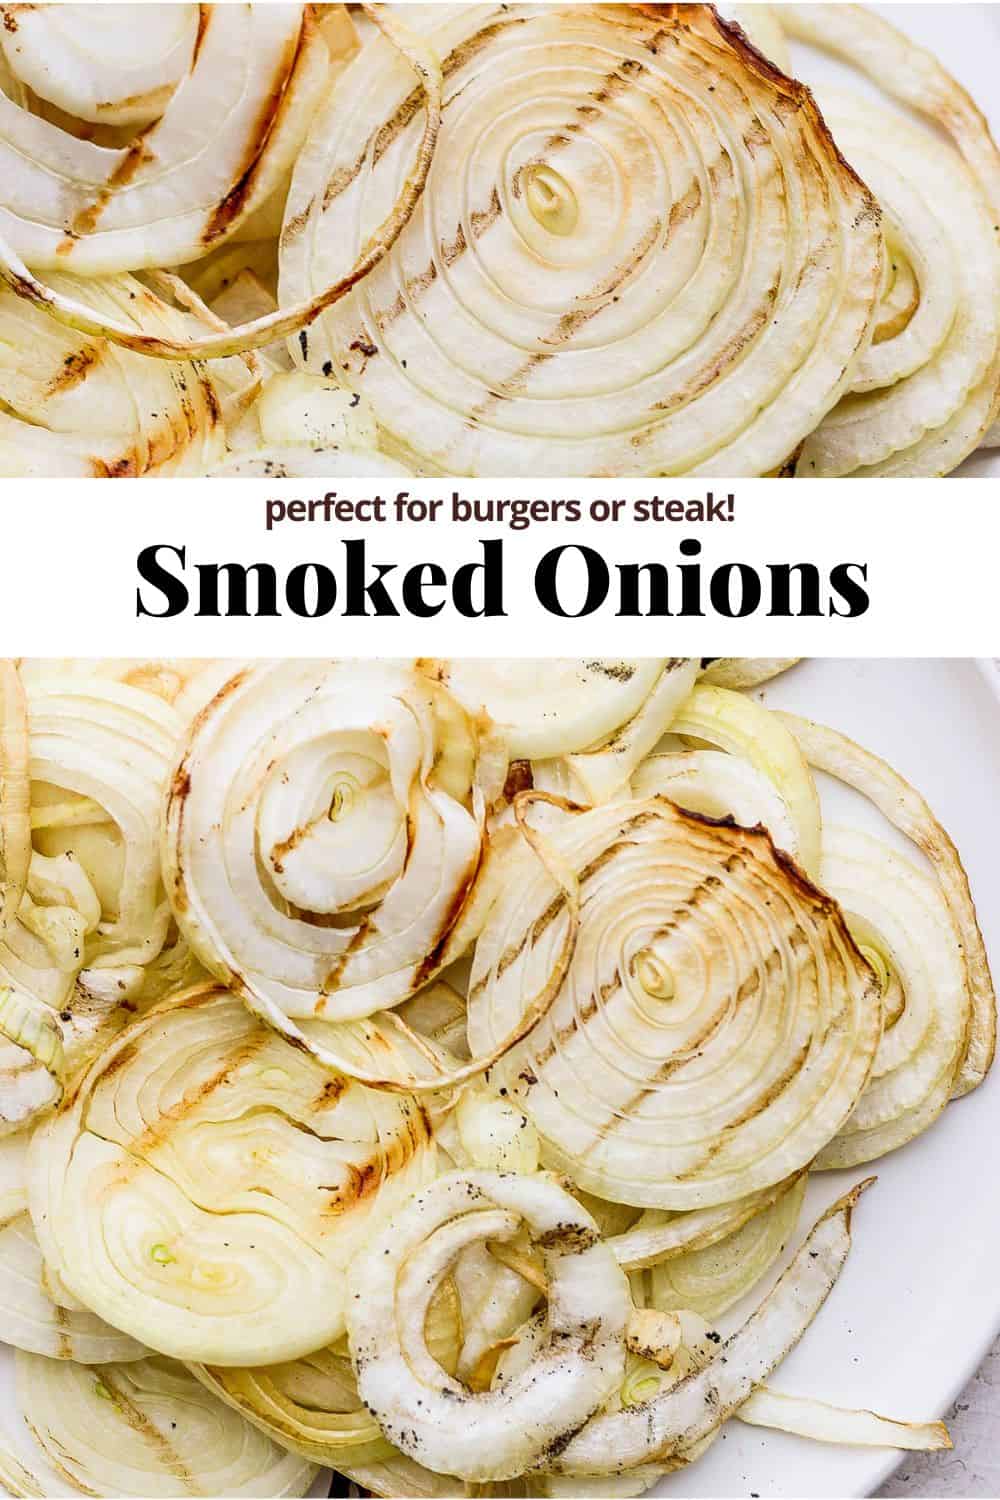 Pinterest image for smoked onions.